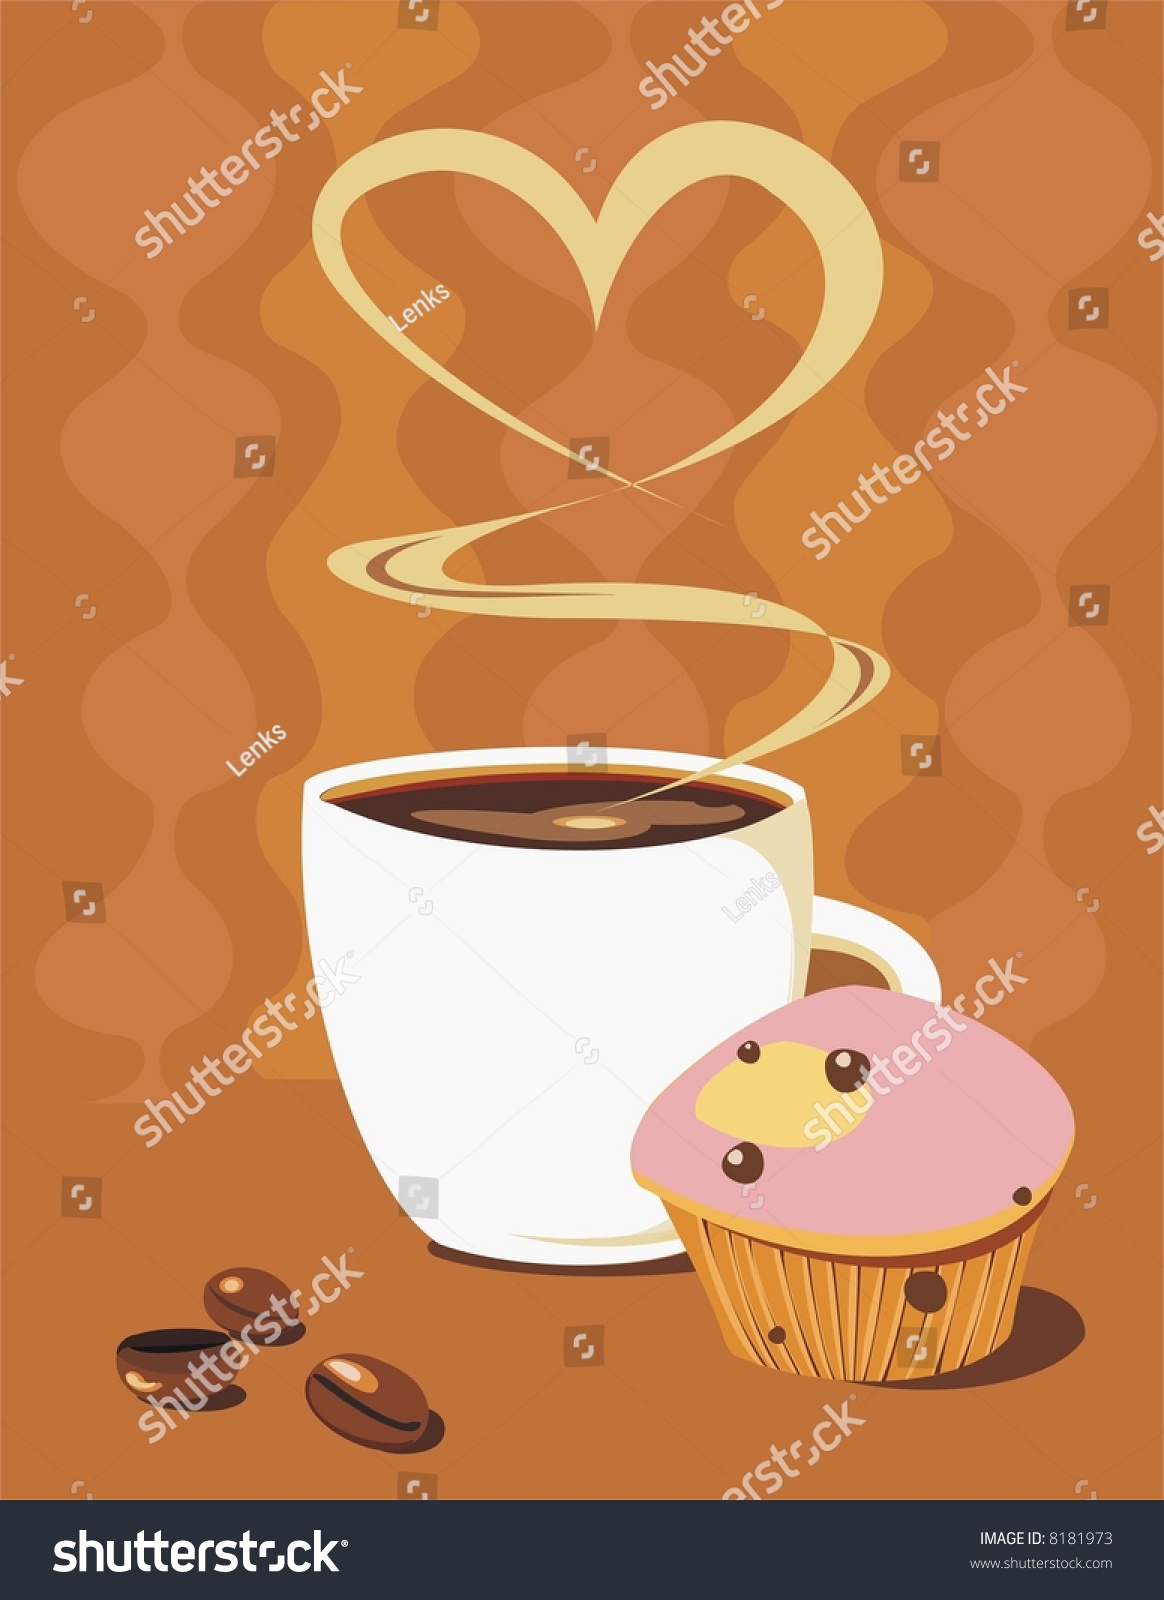 clipart muffins and coffee - photo #11